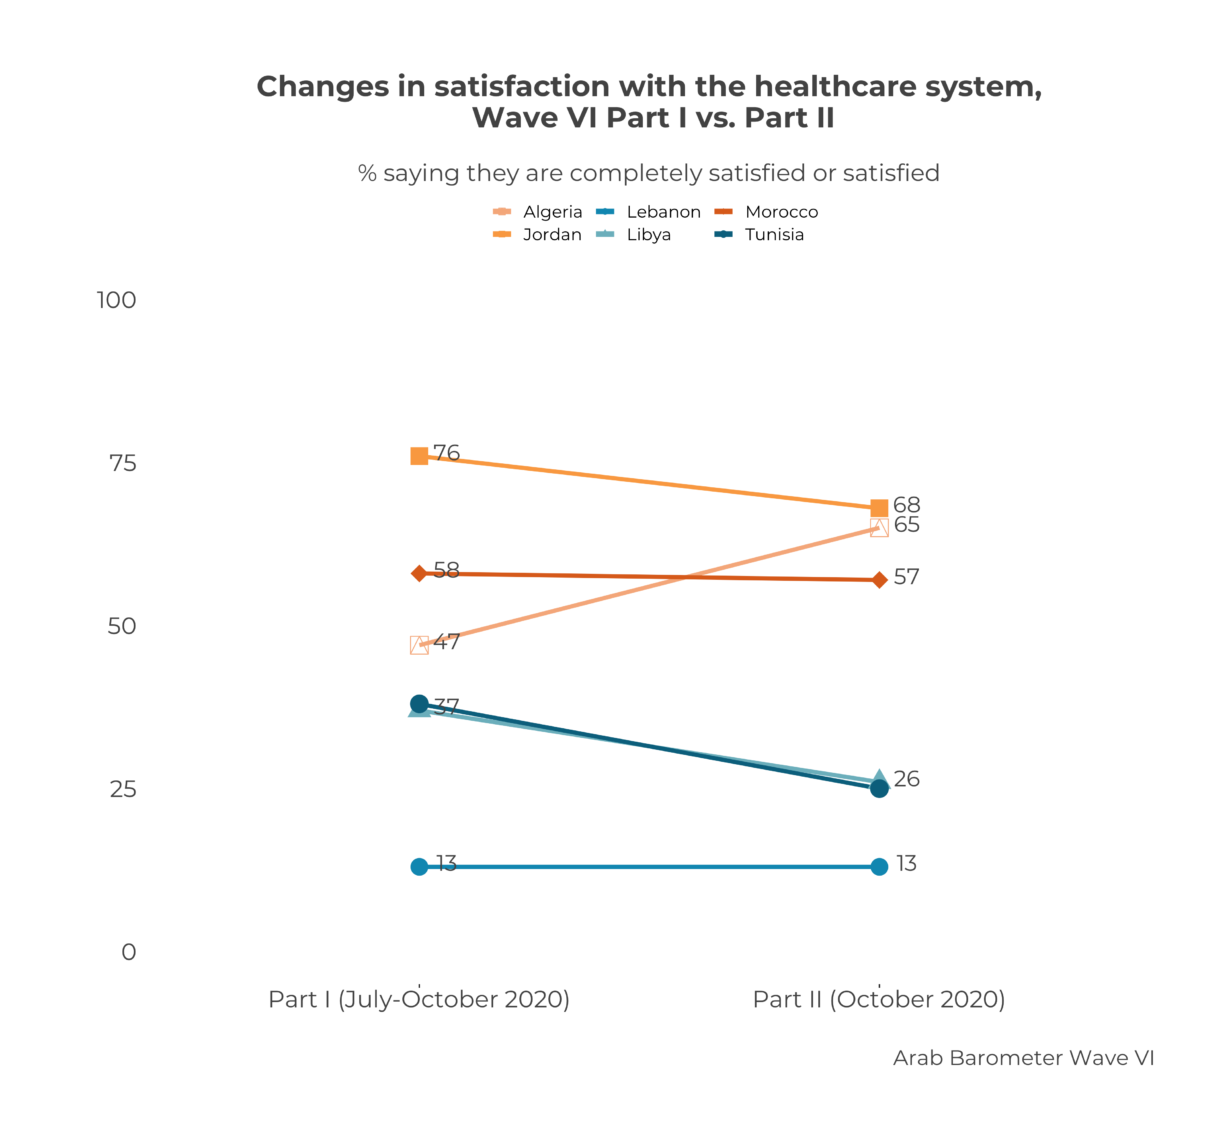 Citizens weigh in on the health of their healthcare systems in MENA